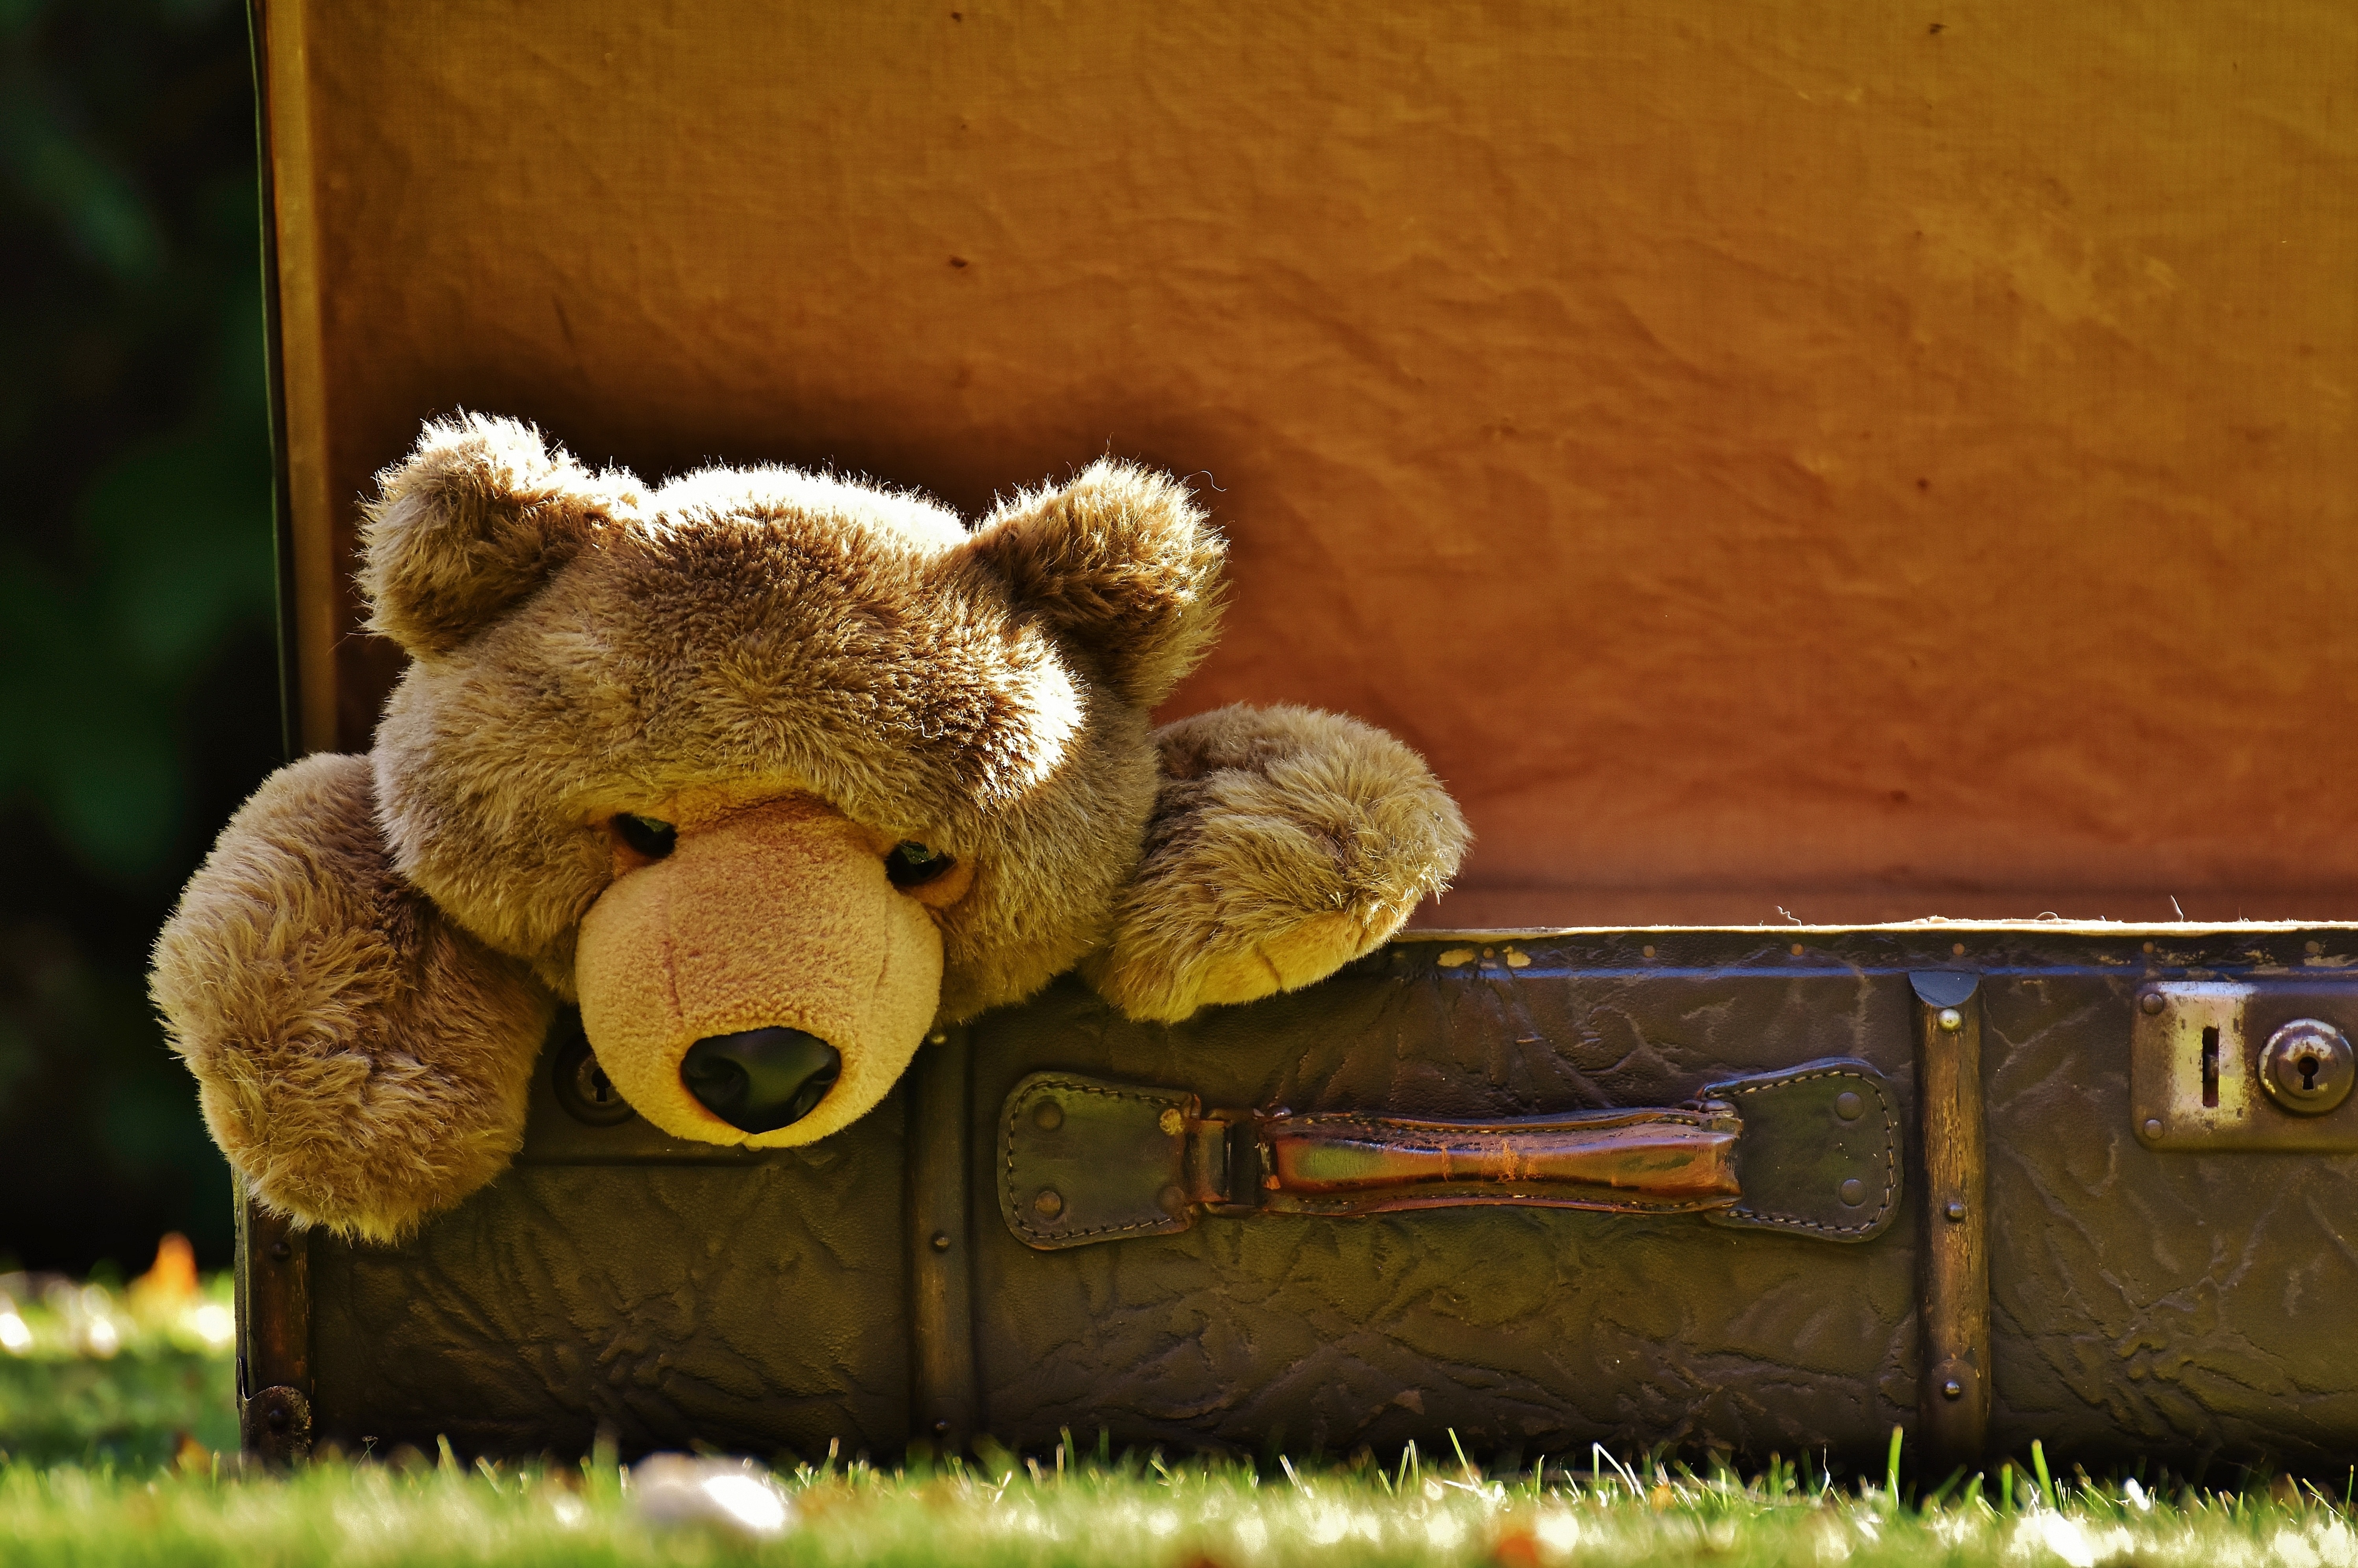 brown teddy bear and luggage